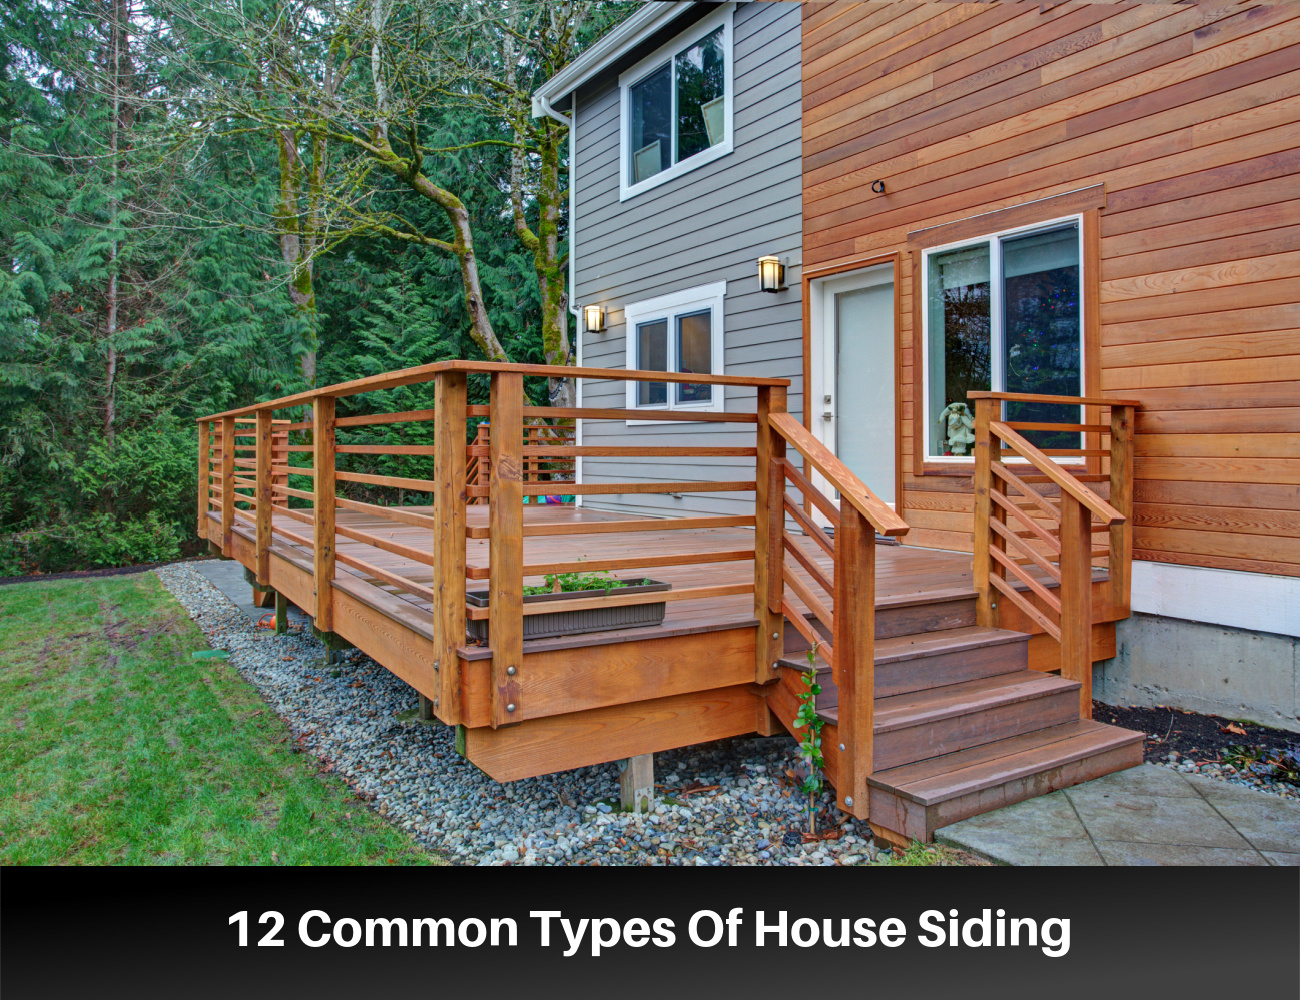  Common Types Of House Siding